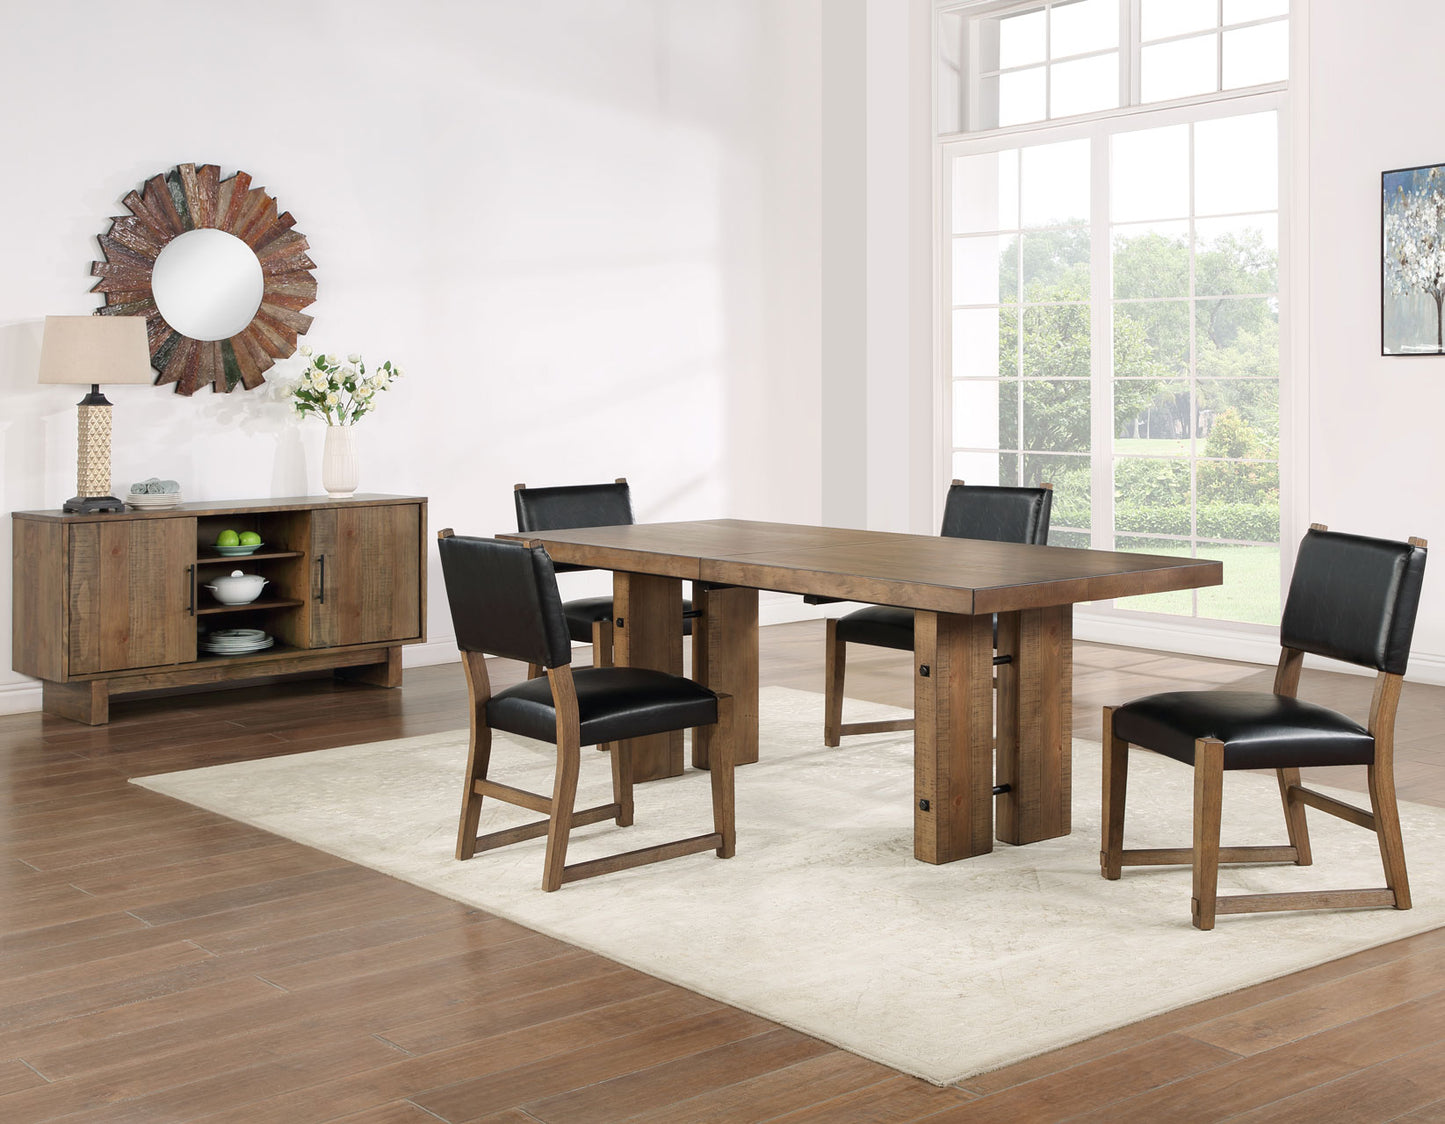 Atmore 5-Piece 96″ Dining Set
(Table & 4 Side Chairs)